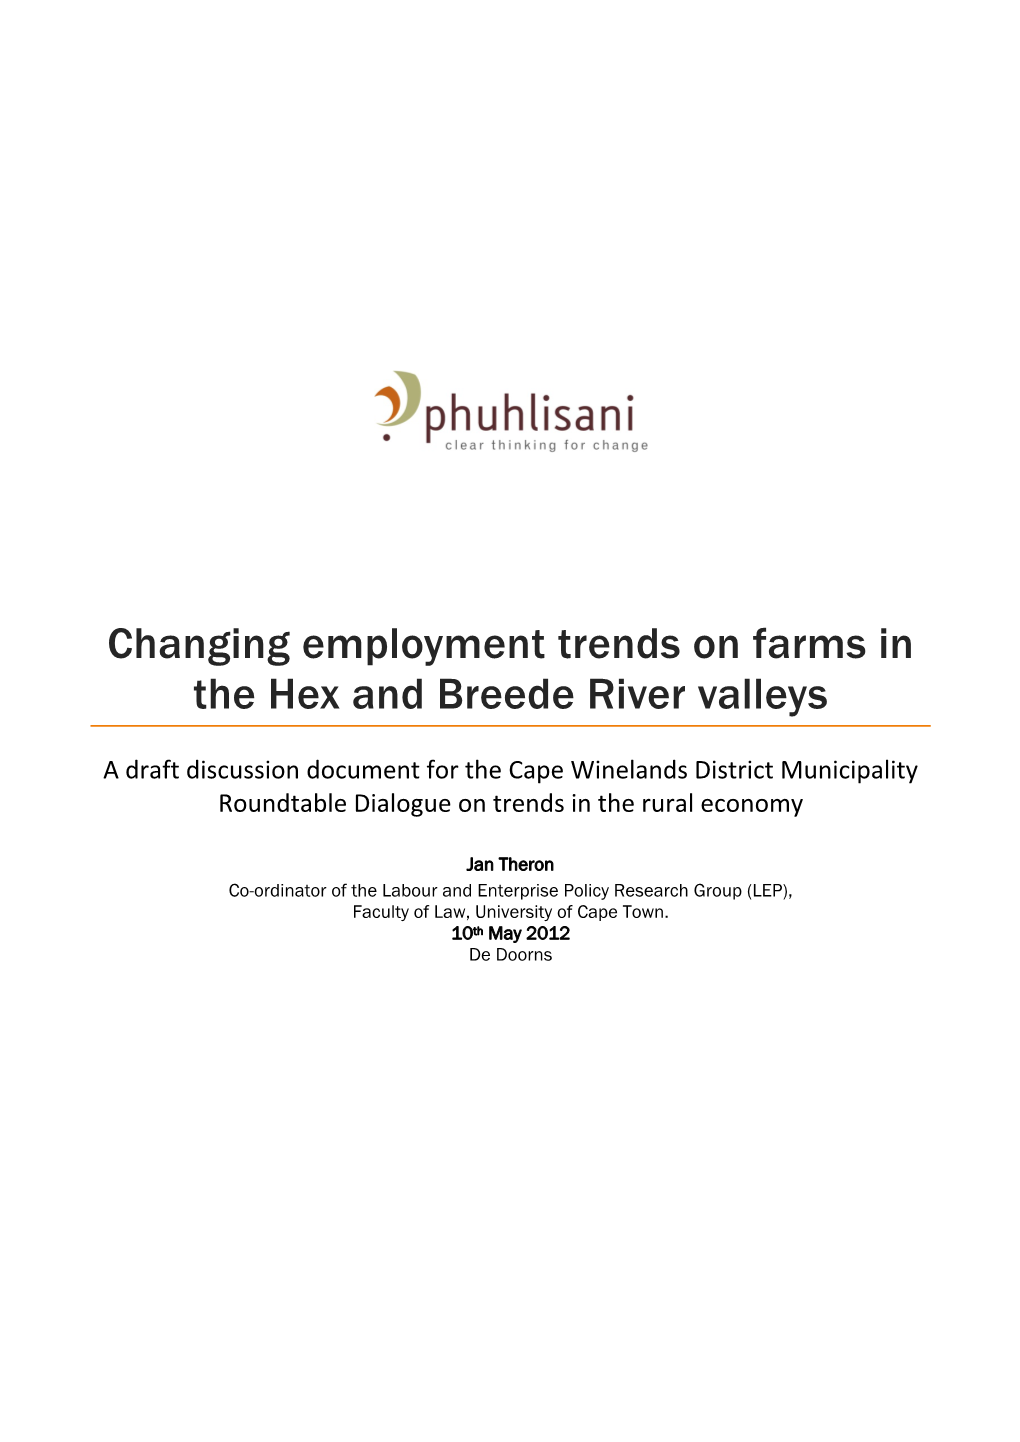 Changing Employment Trends on Farms in the Hex and Breede River Valleys